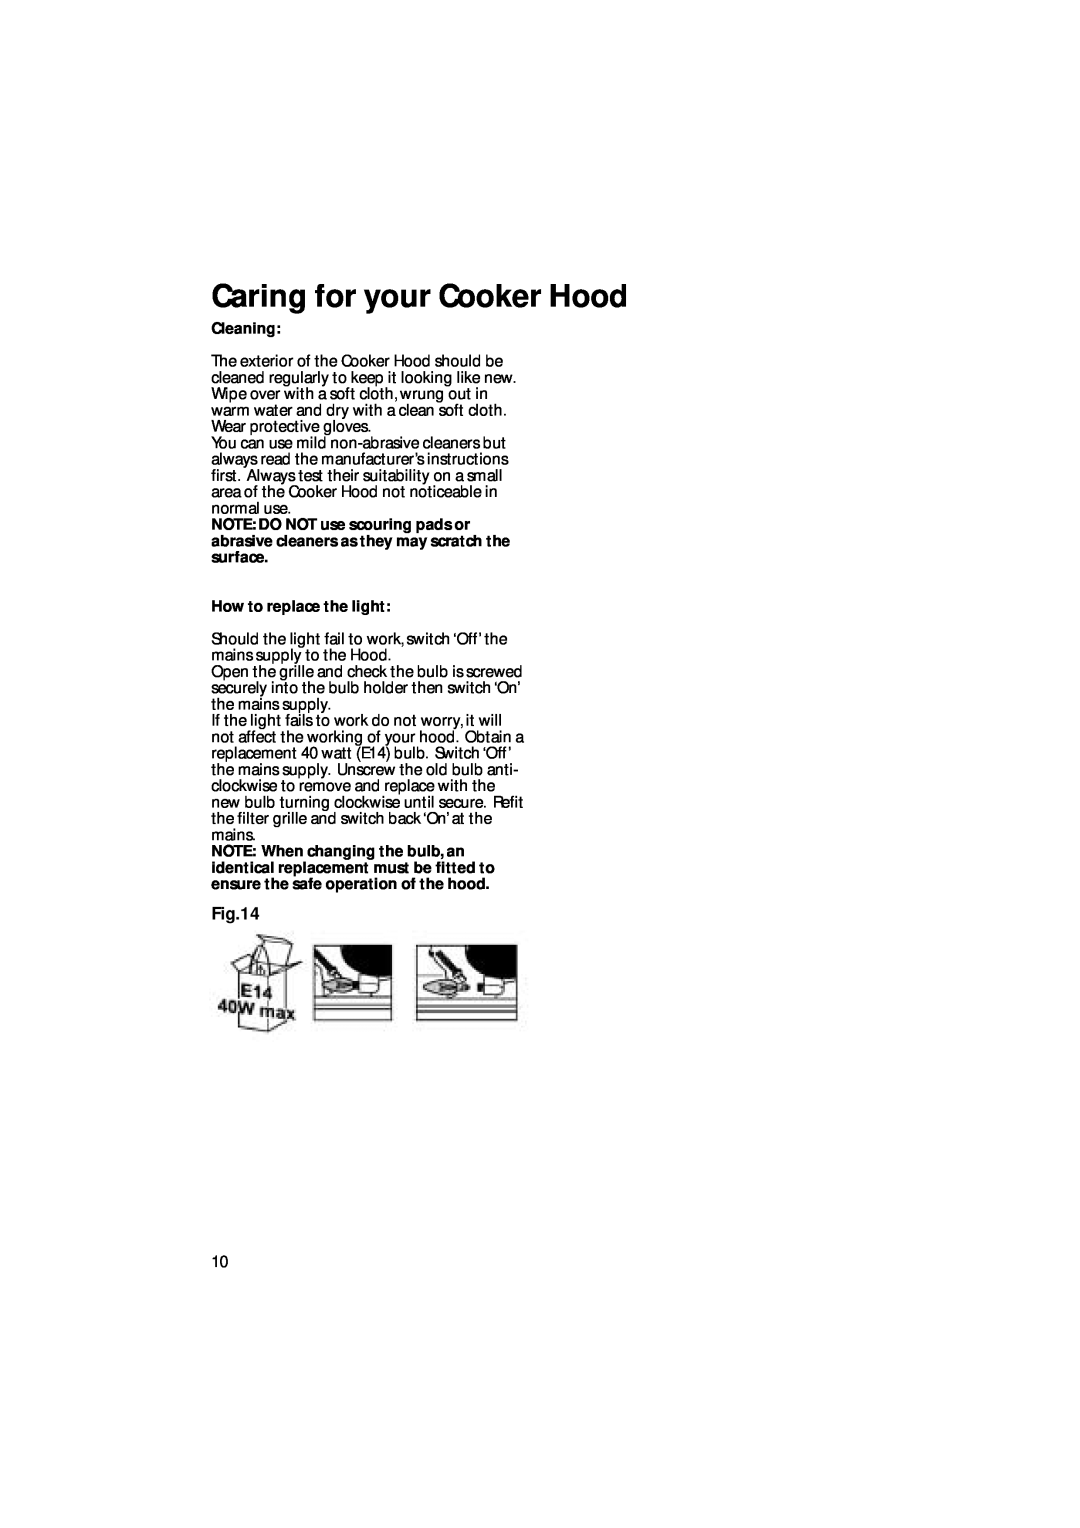 Creda CRV10 manual Caring for your Cooker Hood, Cleaning, How to replace the light 